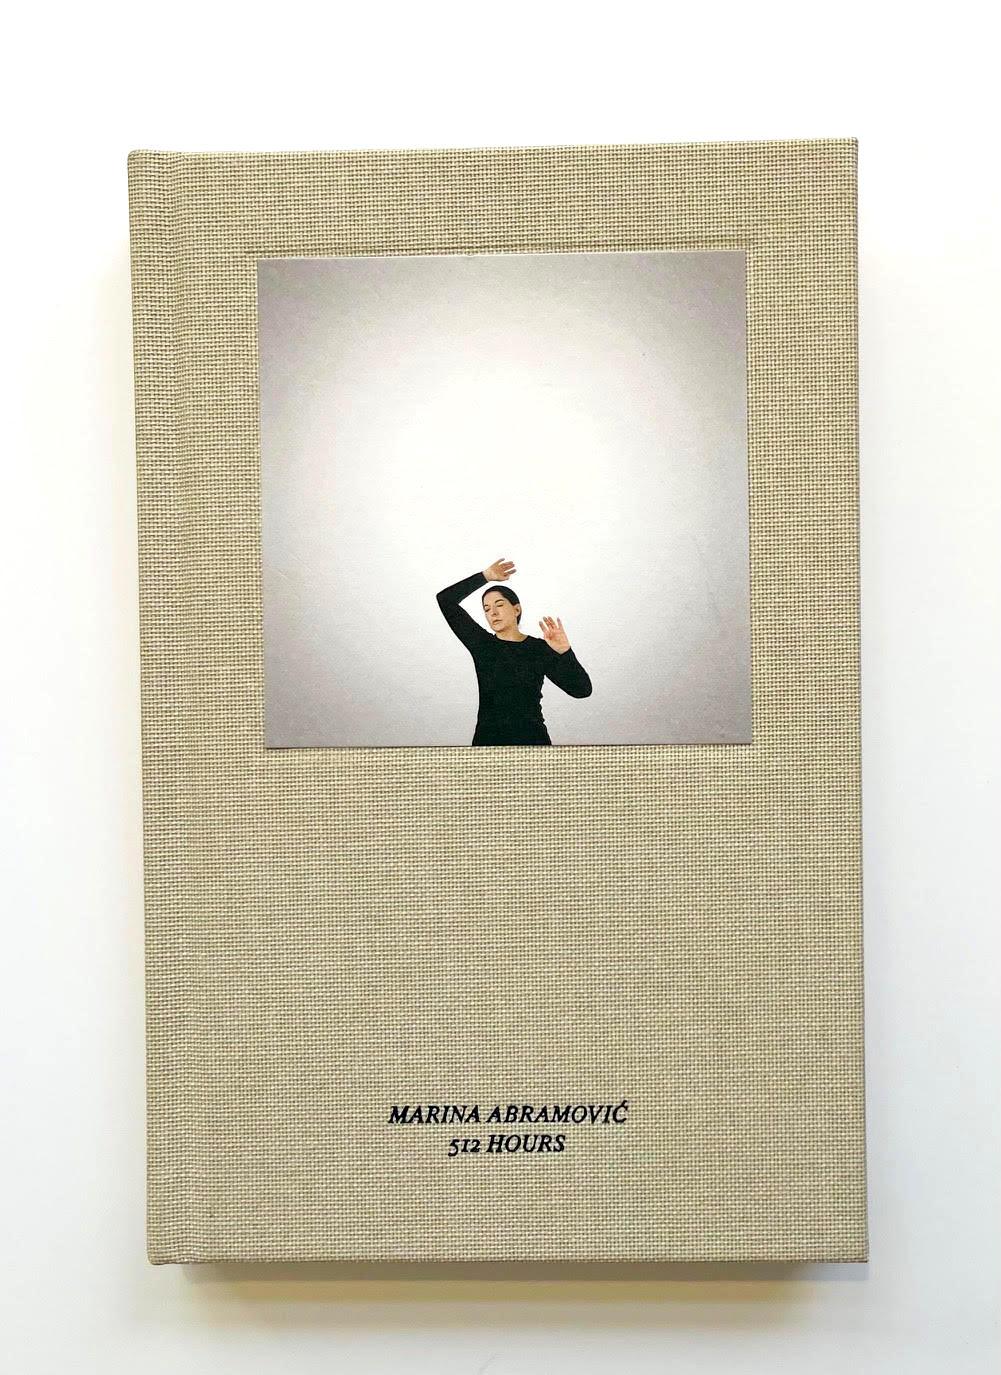 512 Hours (Monograph hand signed and inscribed by Marina Abramovic) 2